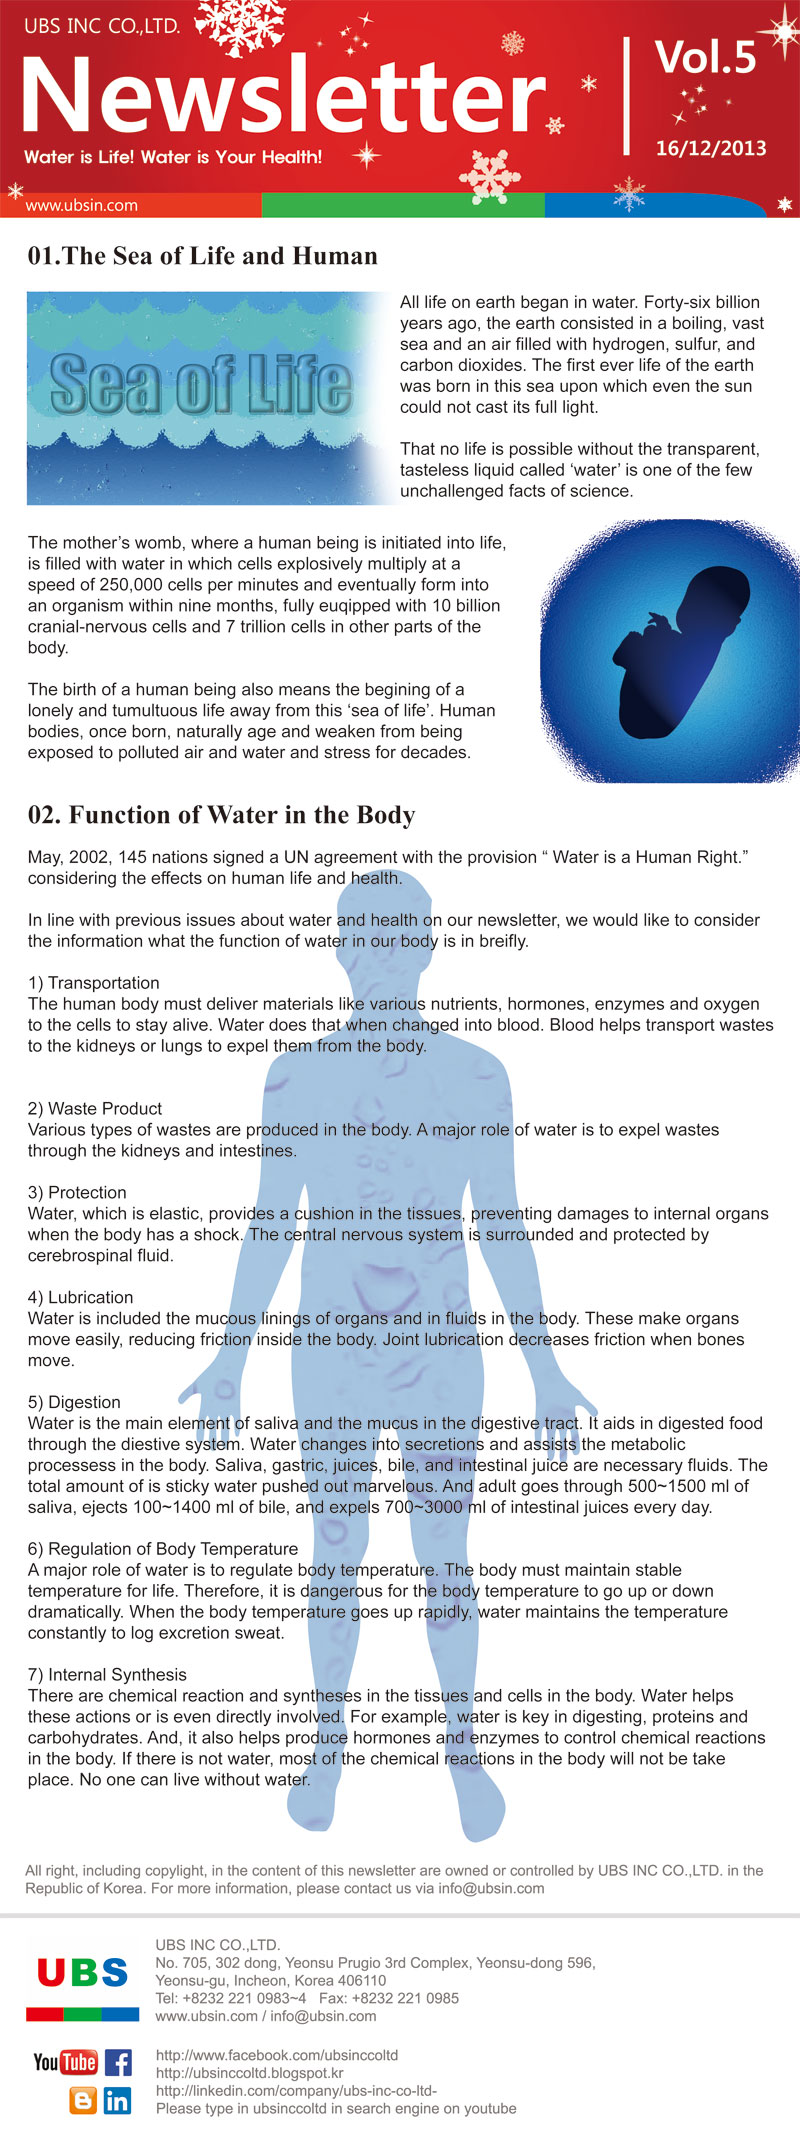 ubs inc co ltd newsletter water is life! water is yourhealth!